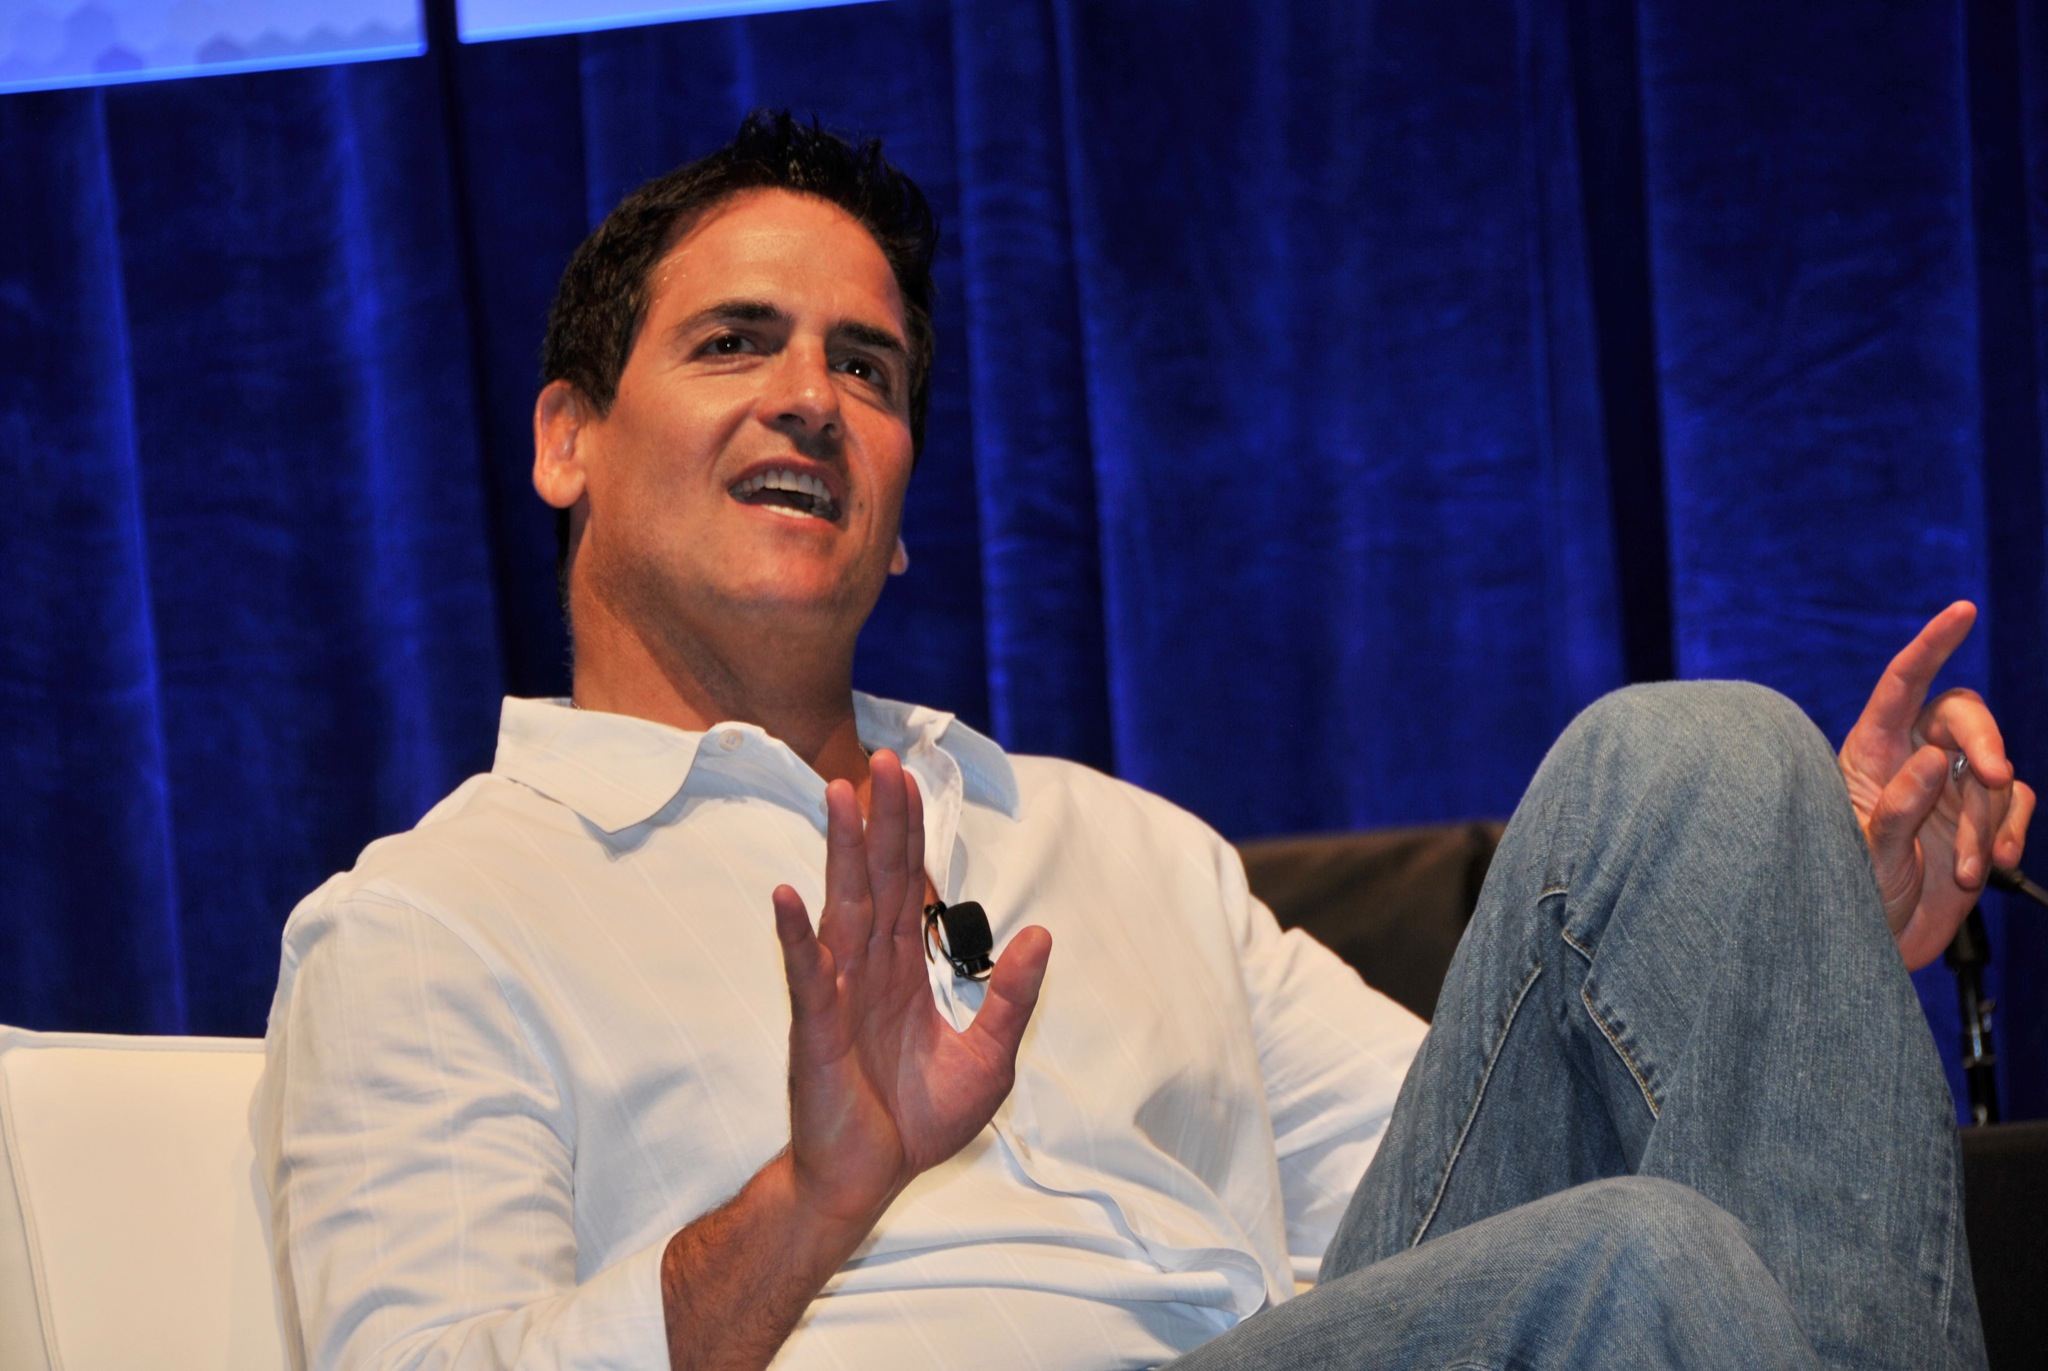 30 Inspirational Quotes From Billionaire Mark Cuban To Lead You To Success